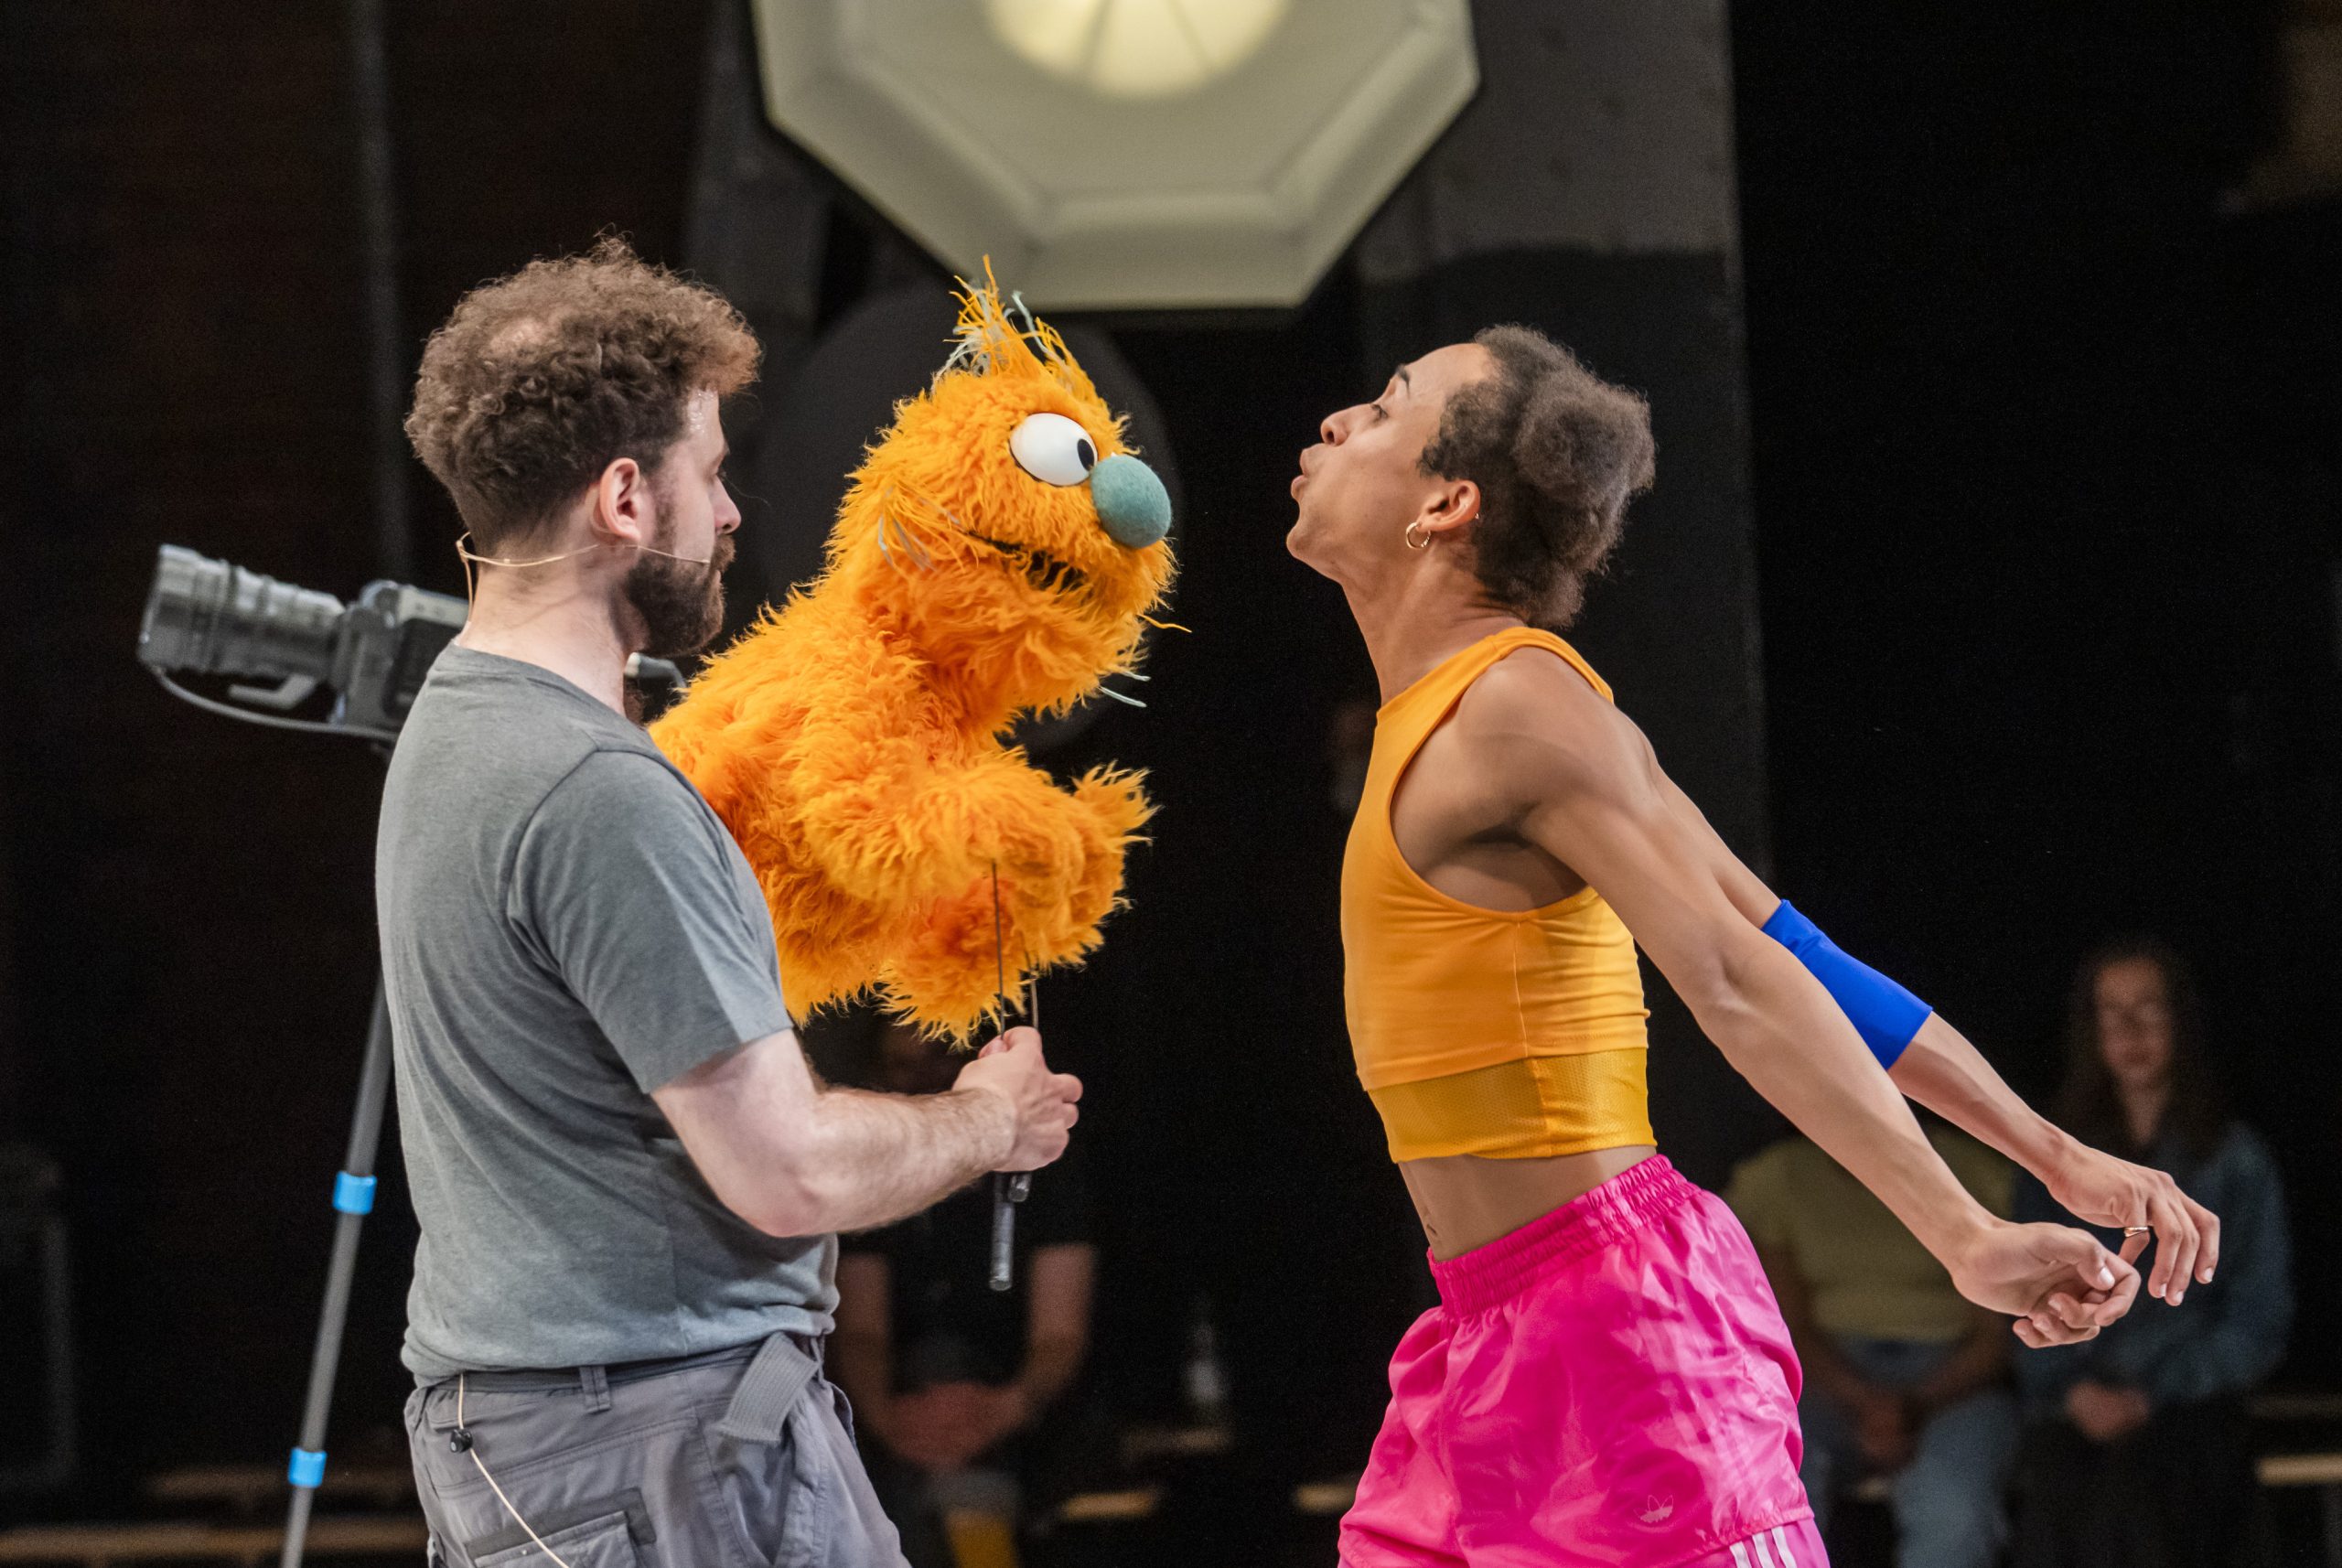 Two performers on stage. One is holding an orange furry muppet style puppet. The other performer blows air into the puppet's fur.